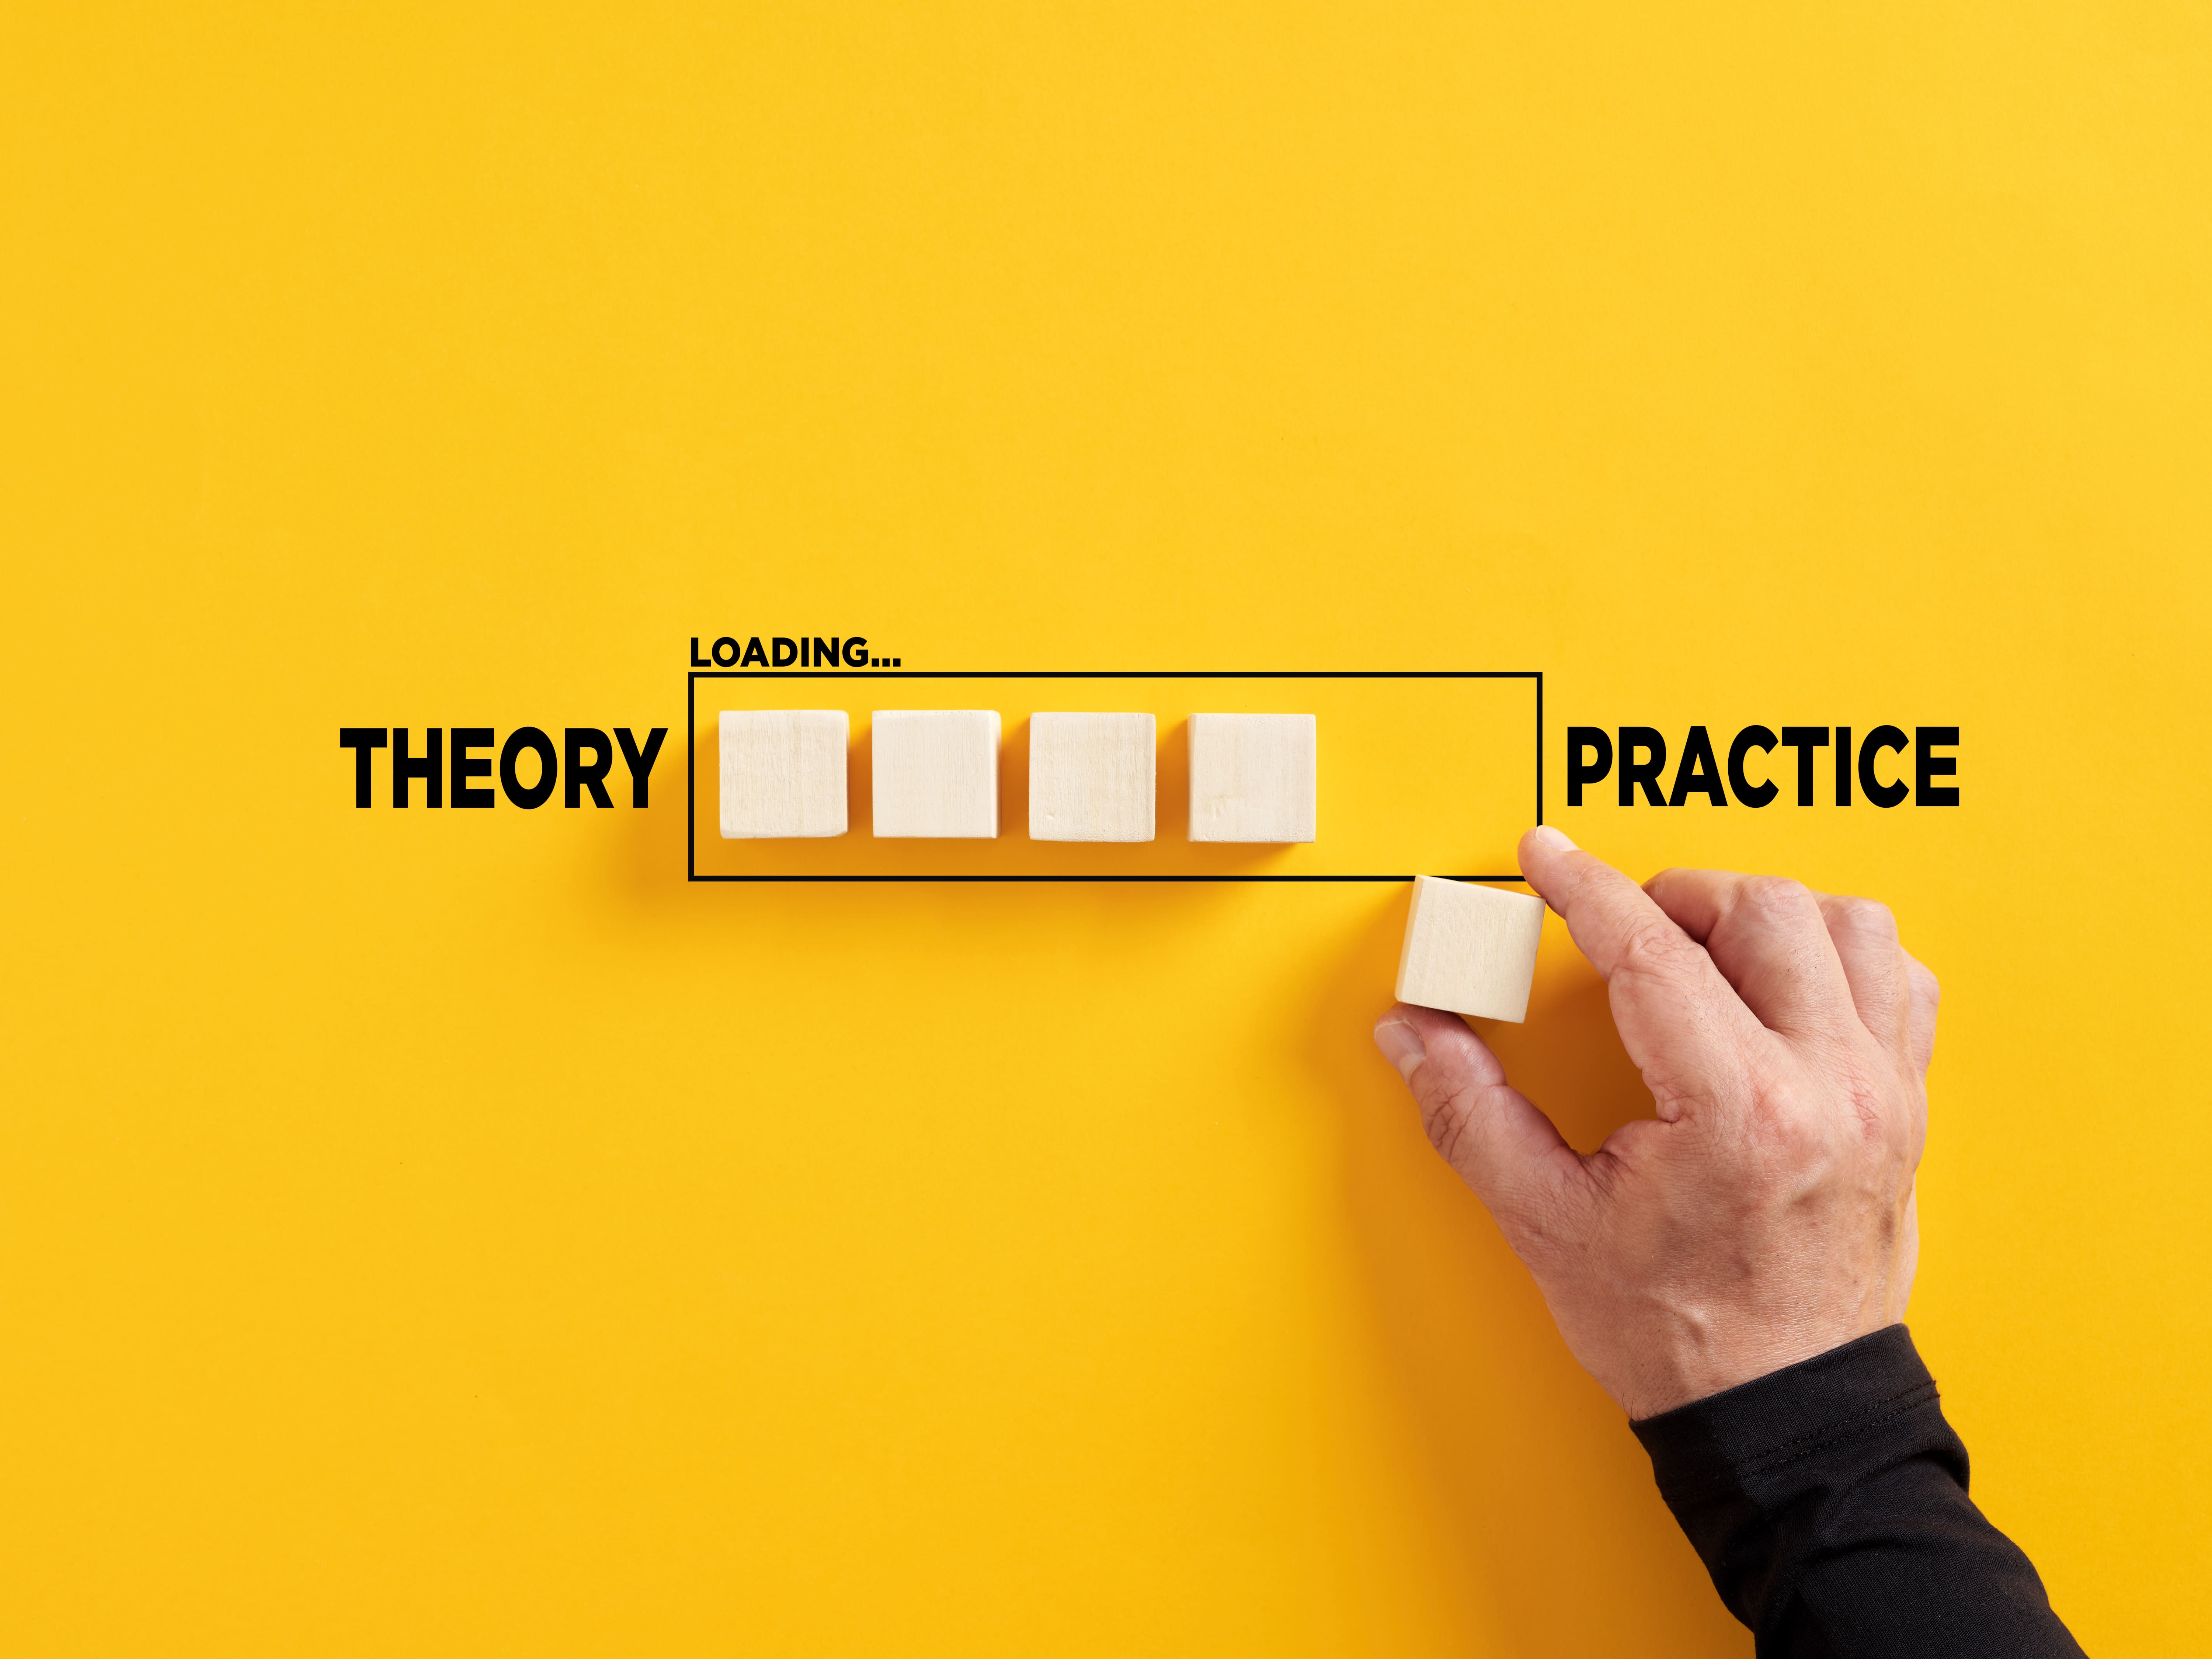 the words Theory, loading... and practice